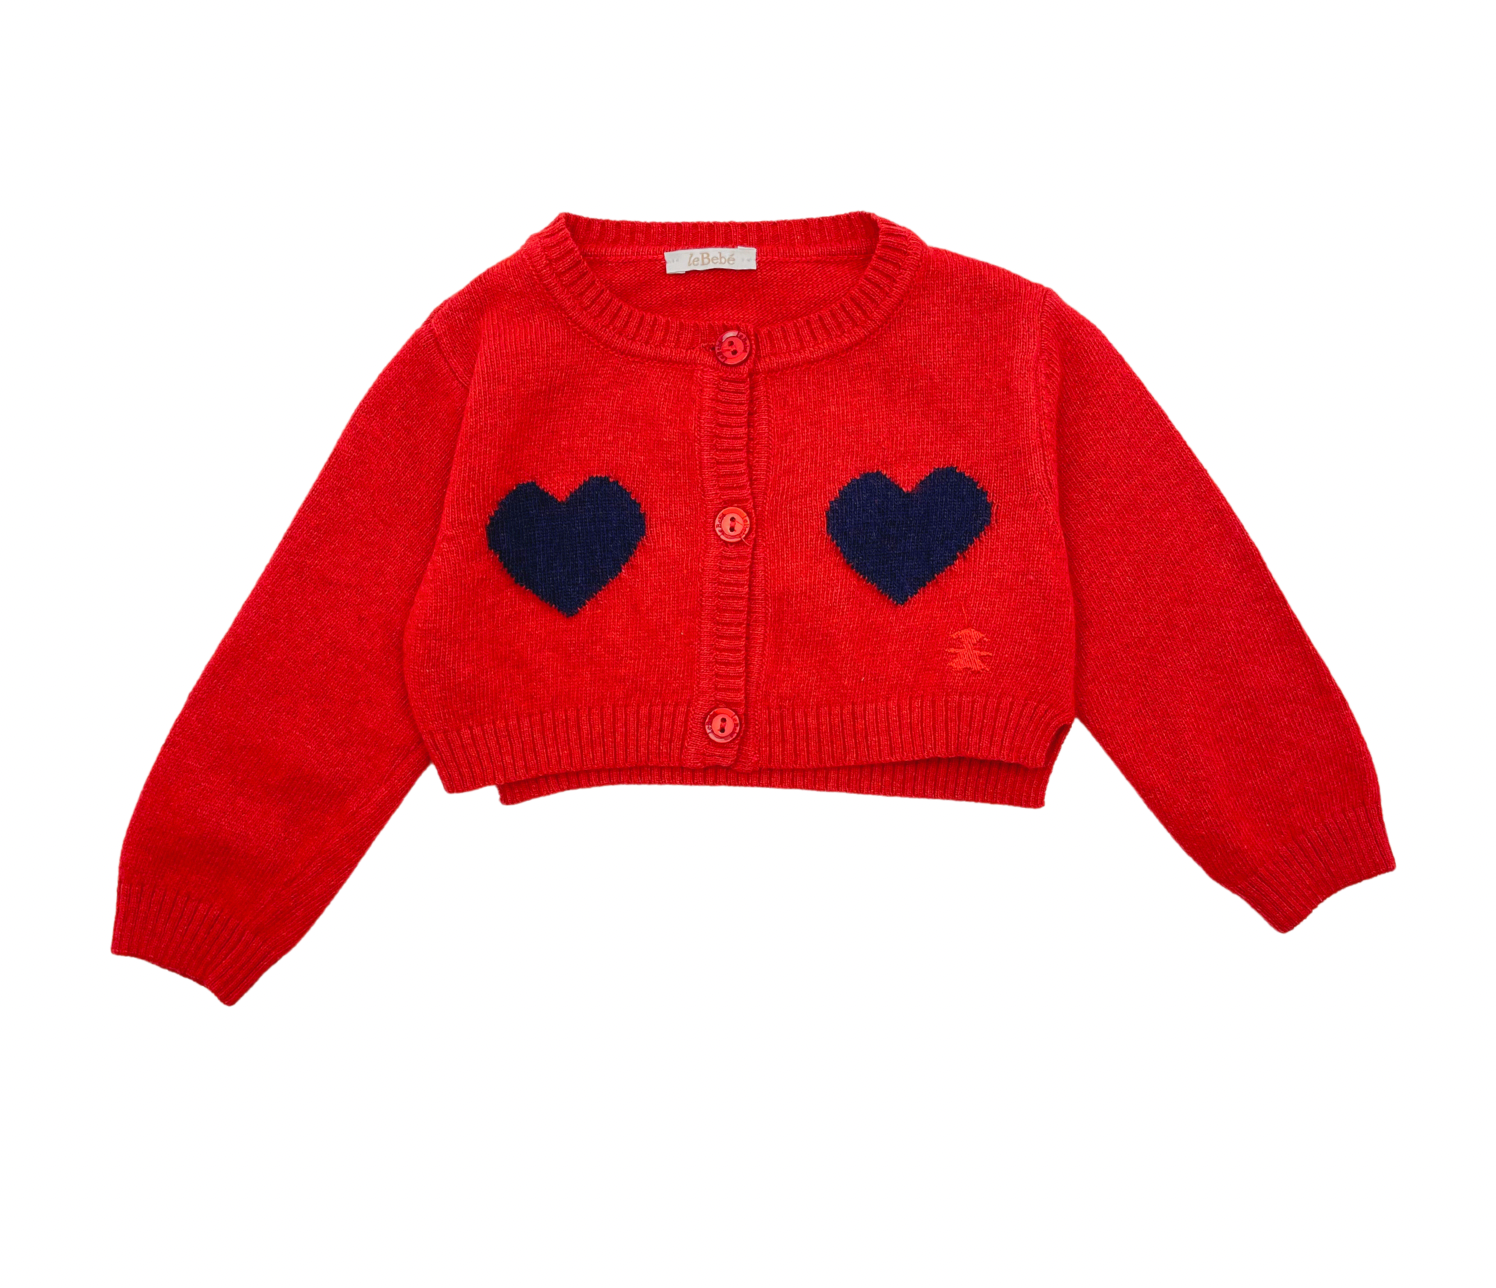 LE BABE - Red cardigan with hearts - 6 months